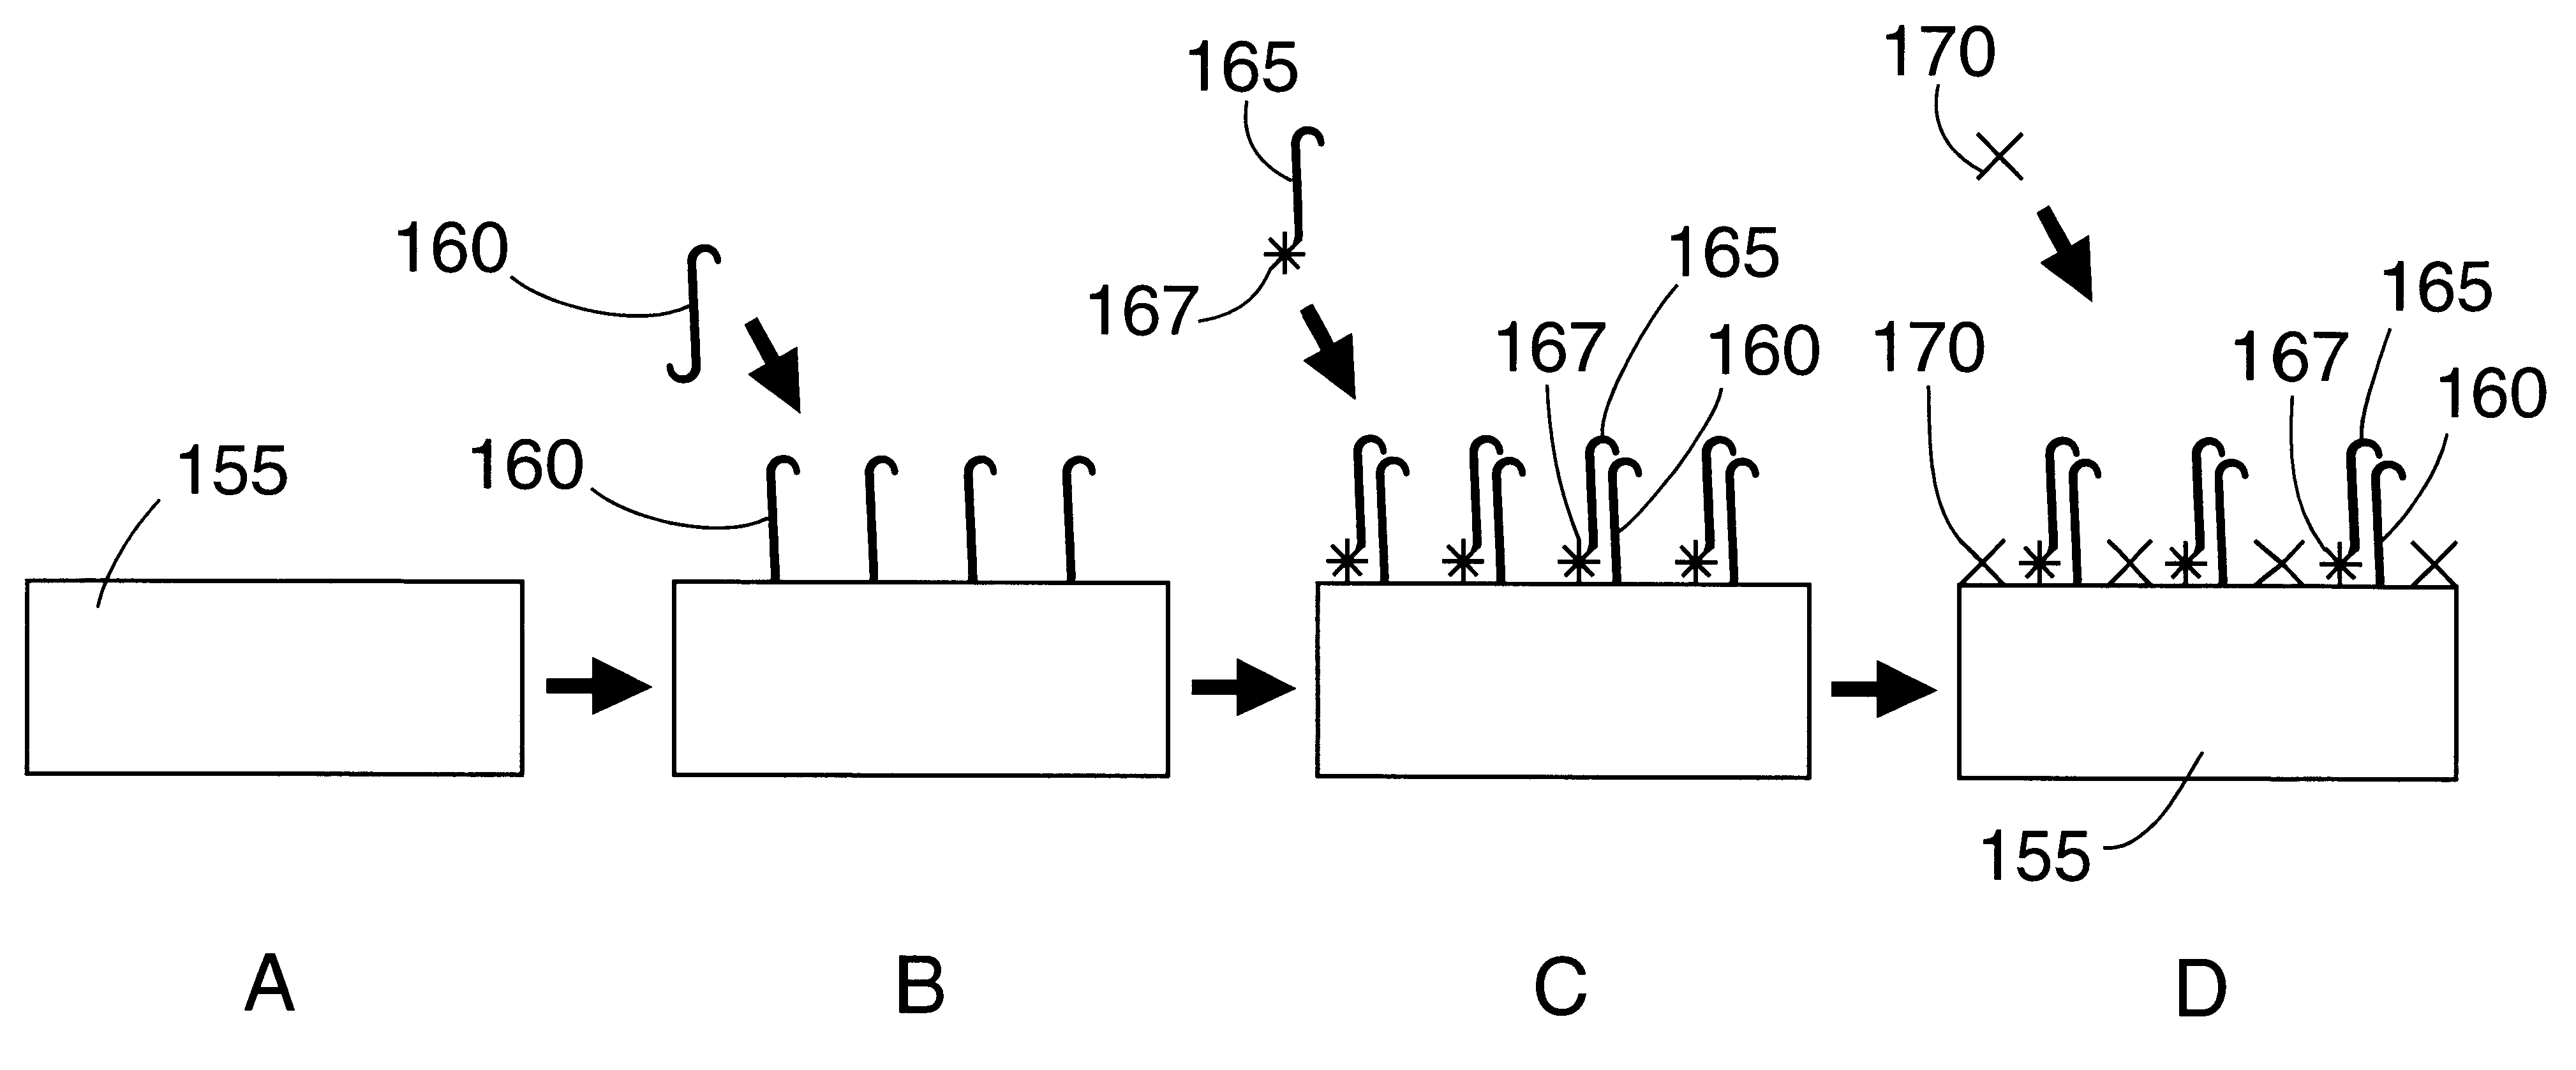 Advanced surface-enhanced Raman gene probe systems and methods thereof